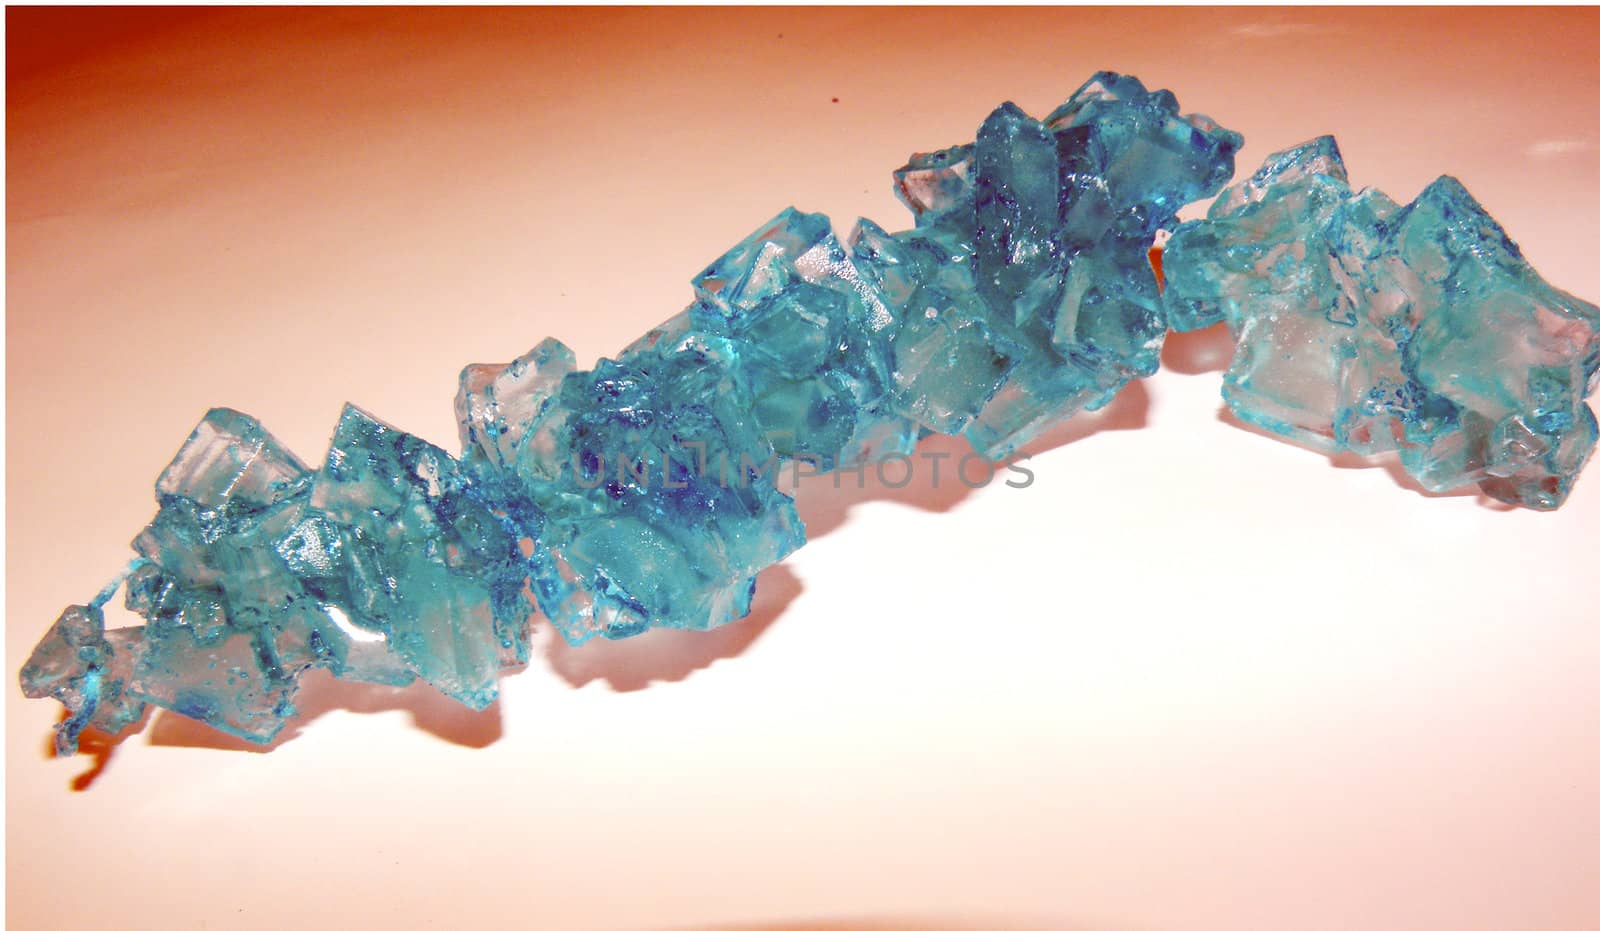 a stricng of teal/ turqoise rock candy.